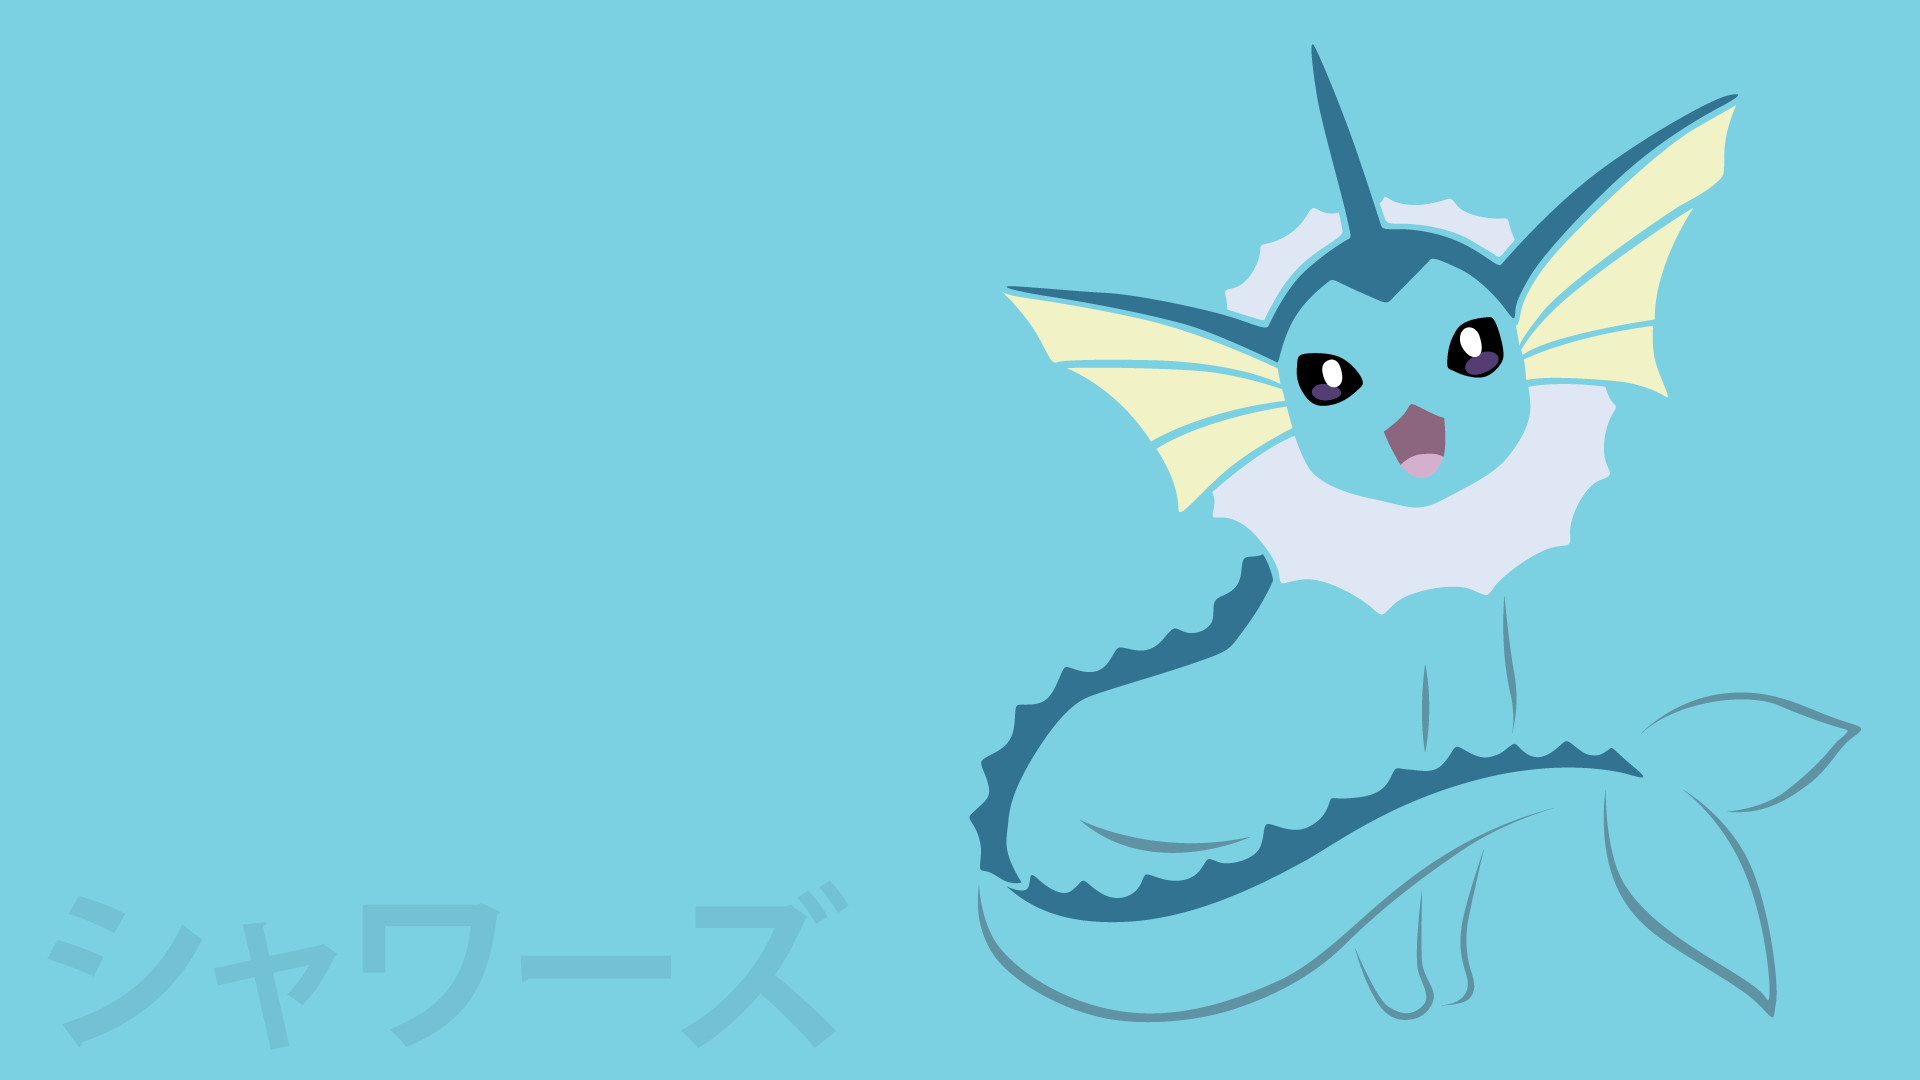 1920x1080 Vaporeon by DannyMyBrother 